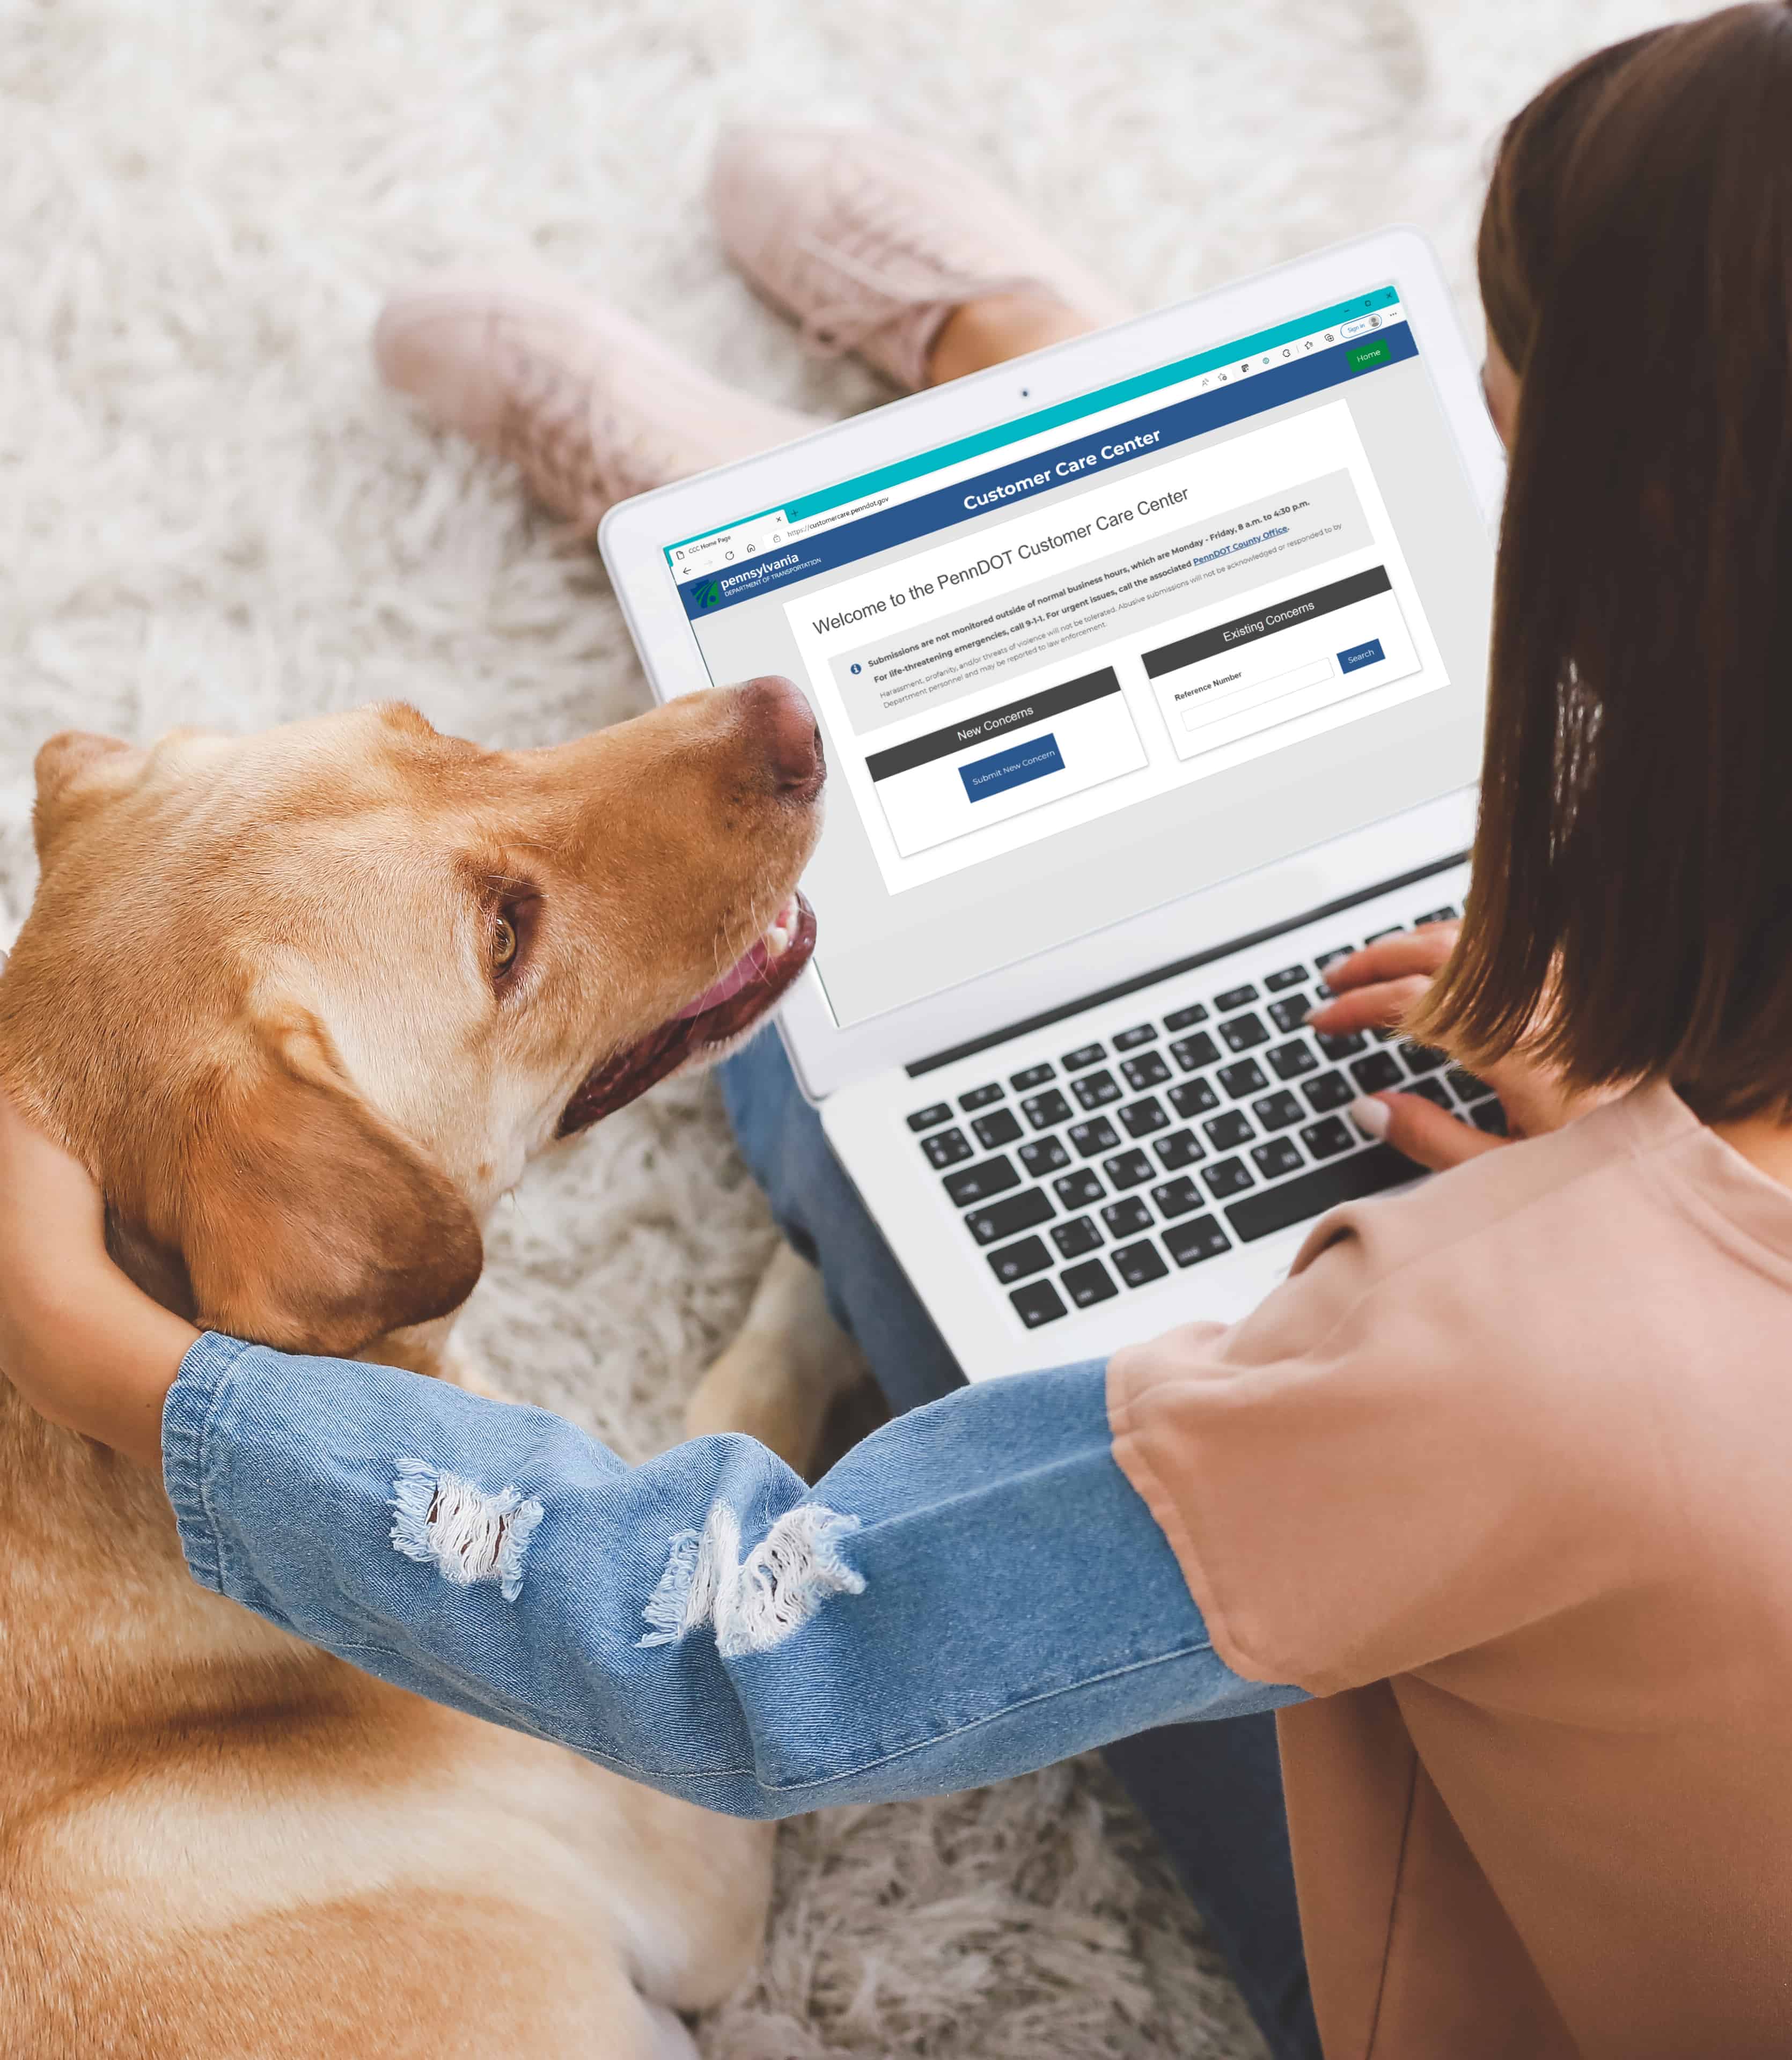 A woman sitting on a white carpet with her dog. A laptop rests in front of her, open to the PennDOT Customer Care Center website.